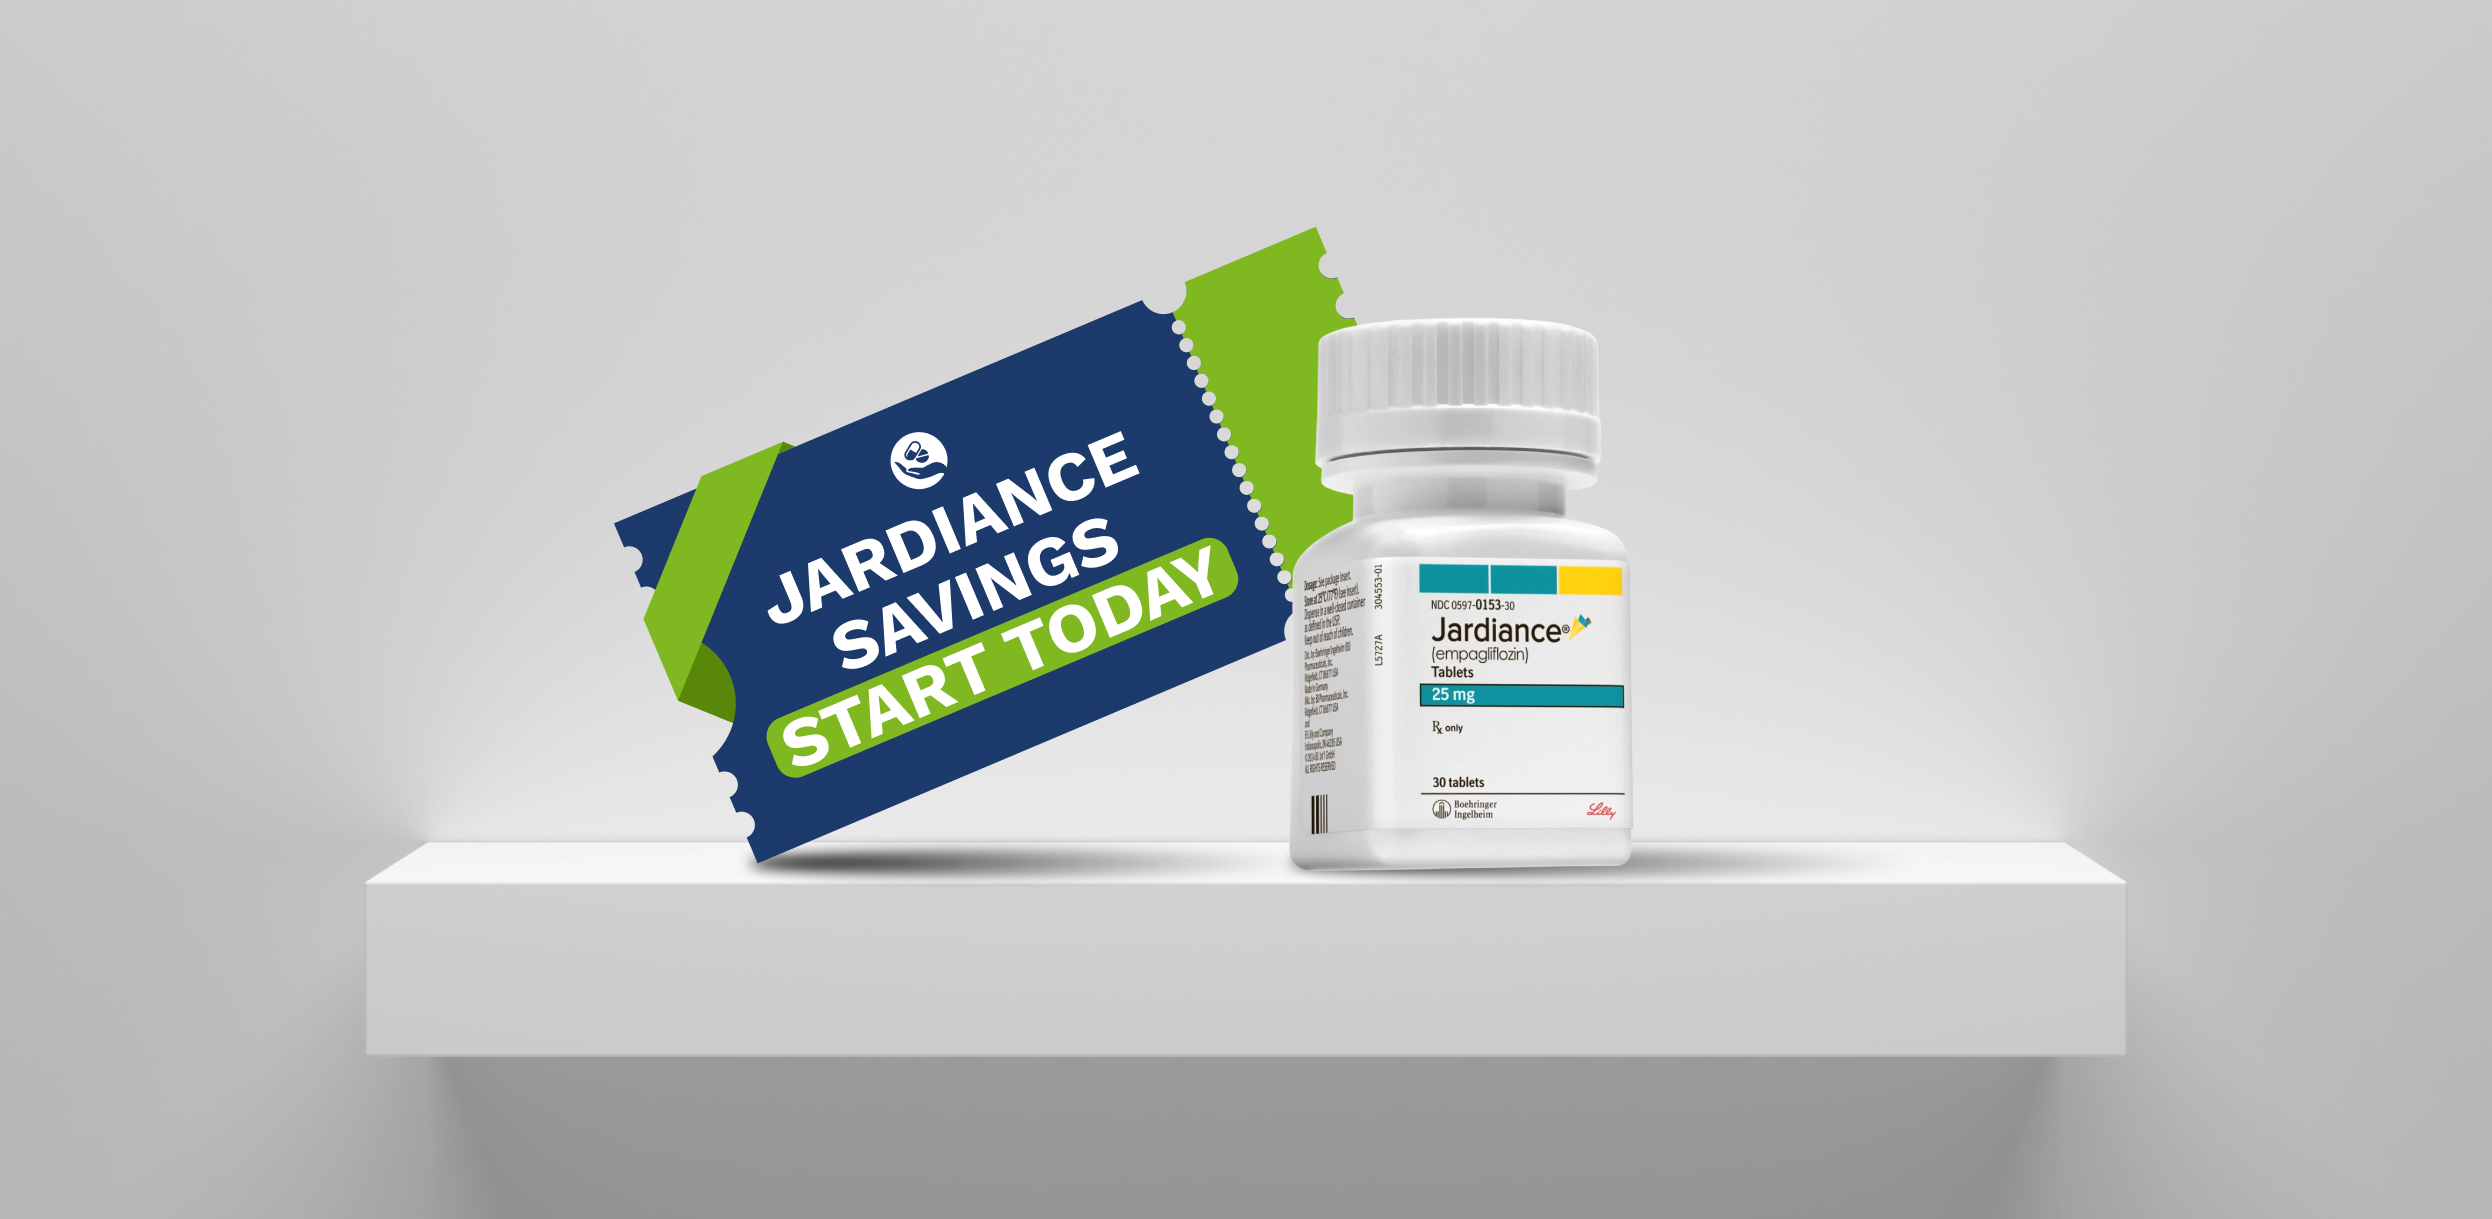 5 Ways to Save on Your Jardiance Prescription